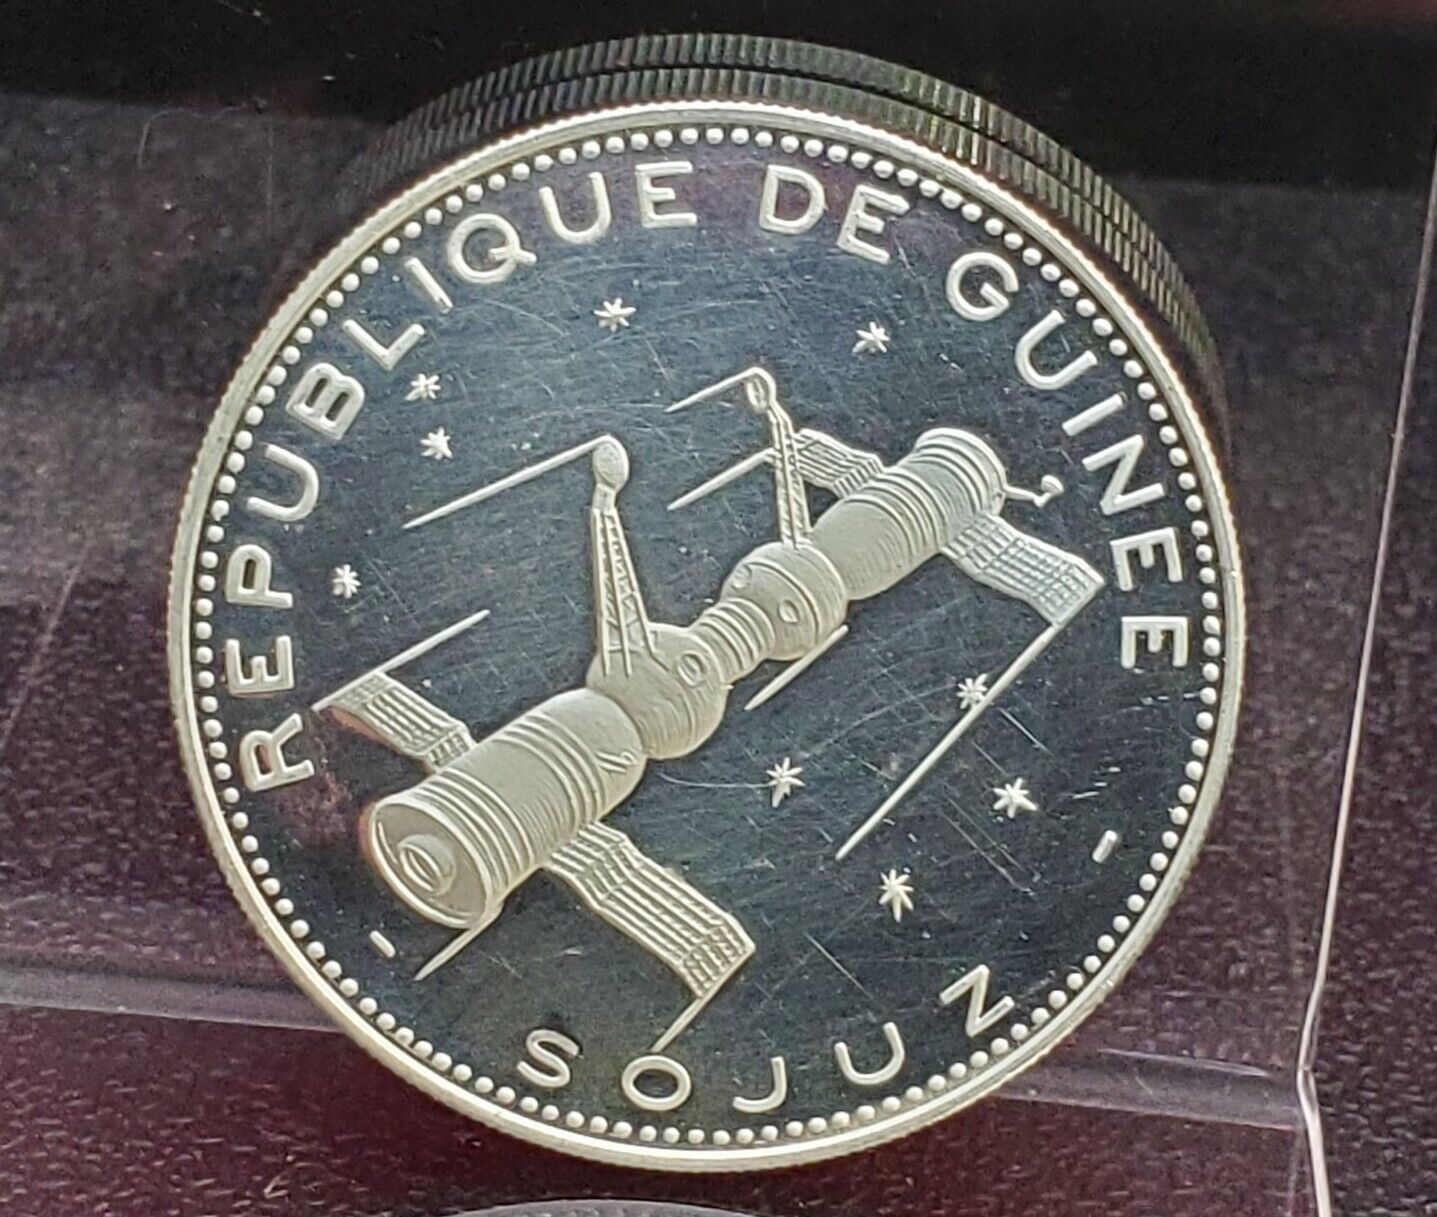 1970 Republic of Guinea Silver Proof 250 Francs Guineens Coin Soyuz Spacecraft